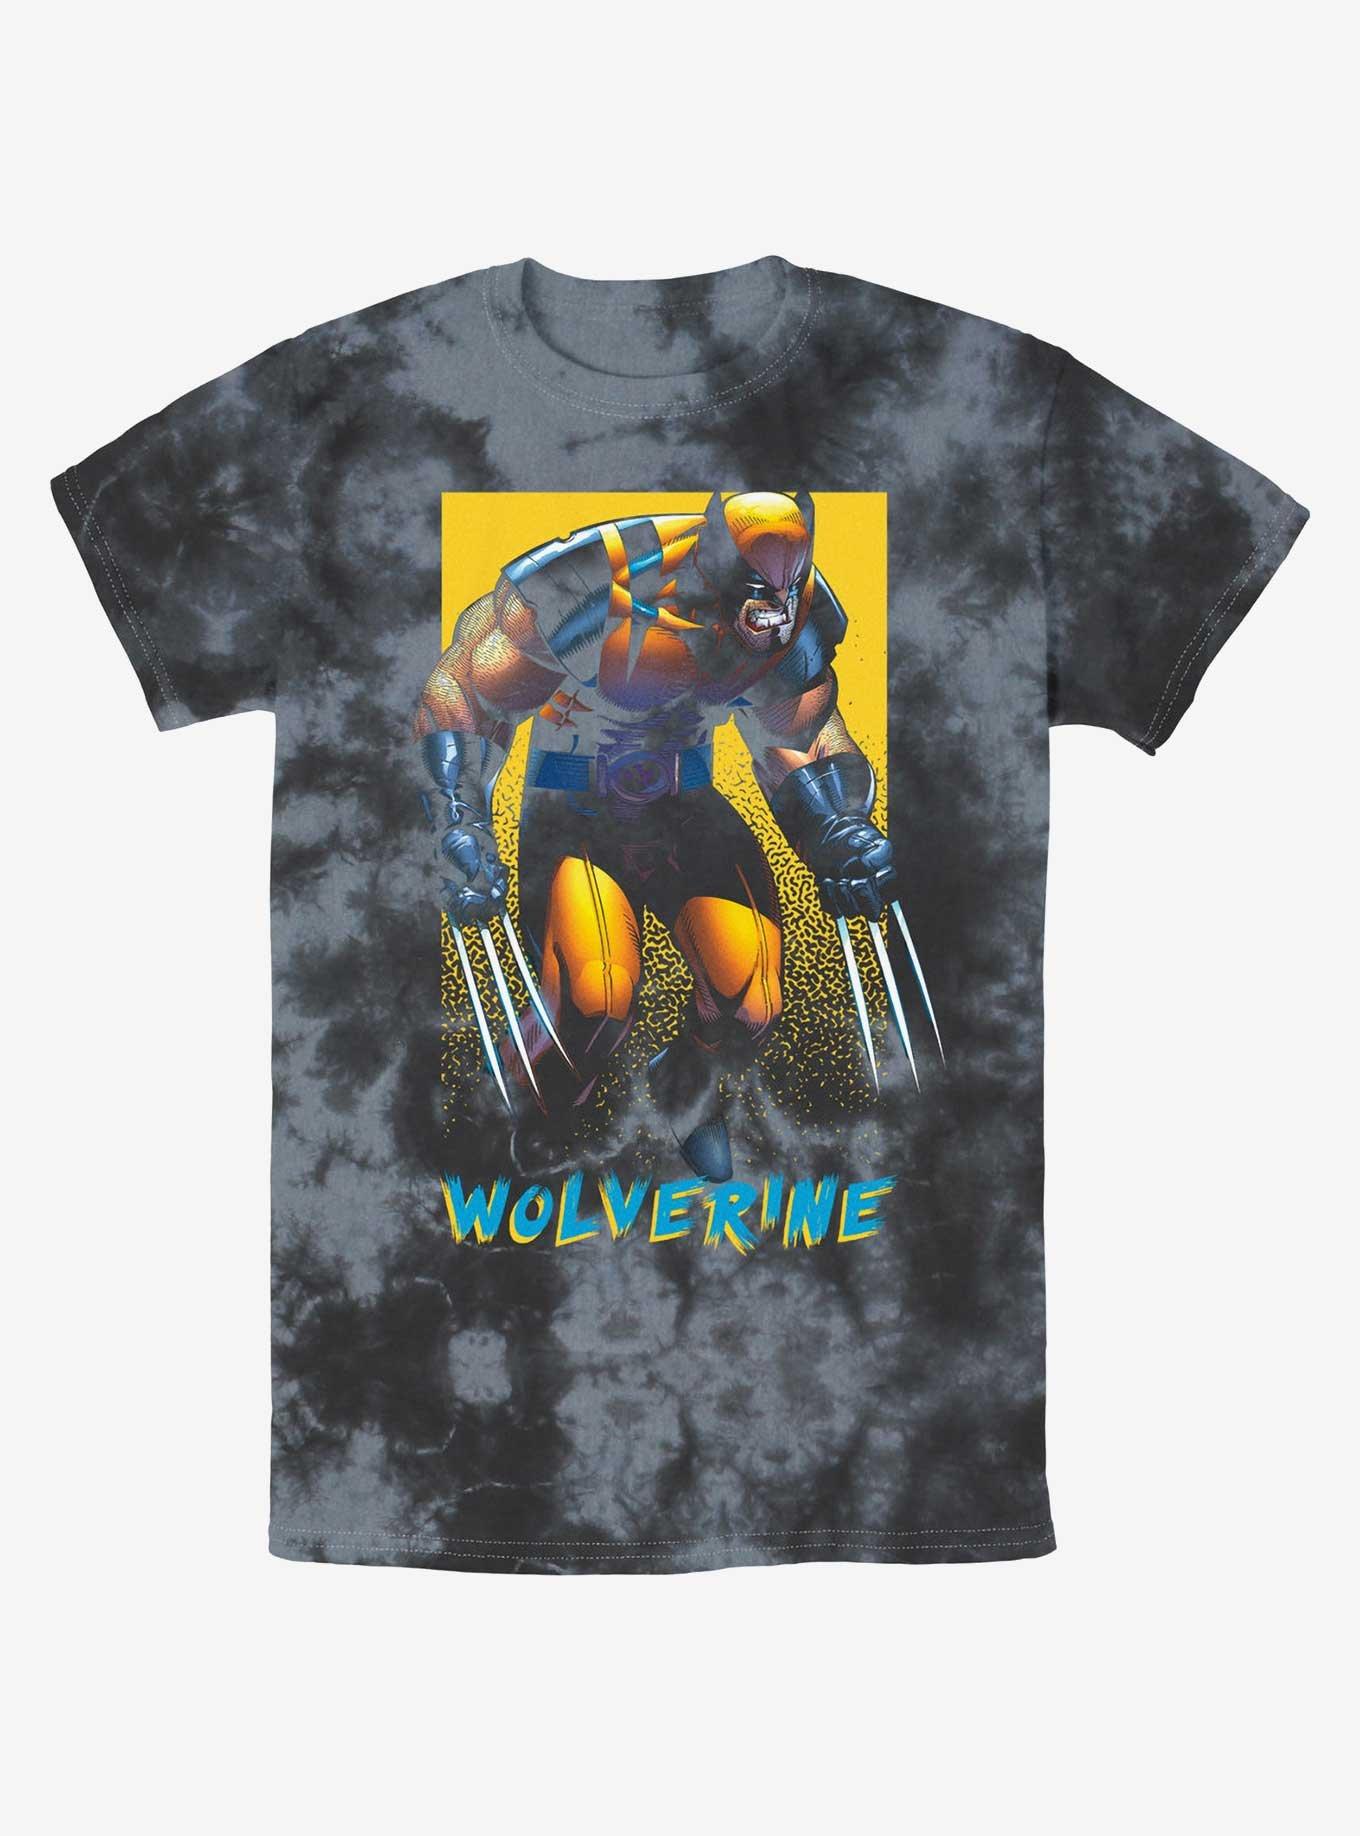 Wolverine Claws Out Poster Tie-Dye T-Shirt, BLKCHAR, hi-res